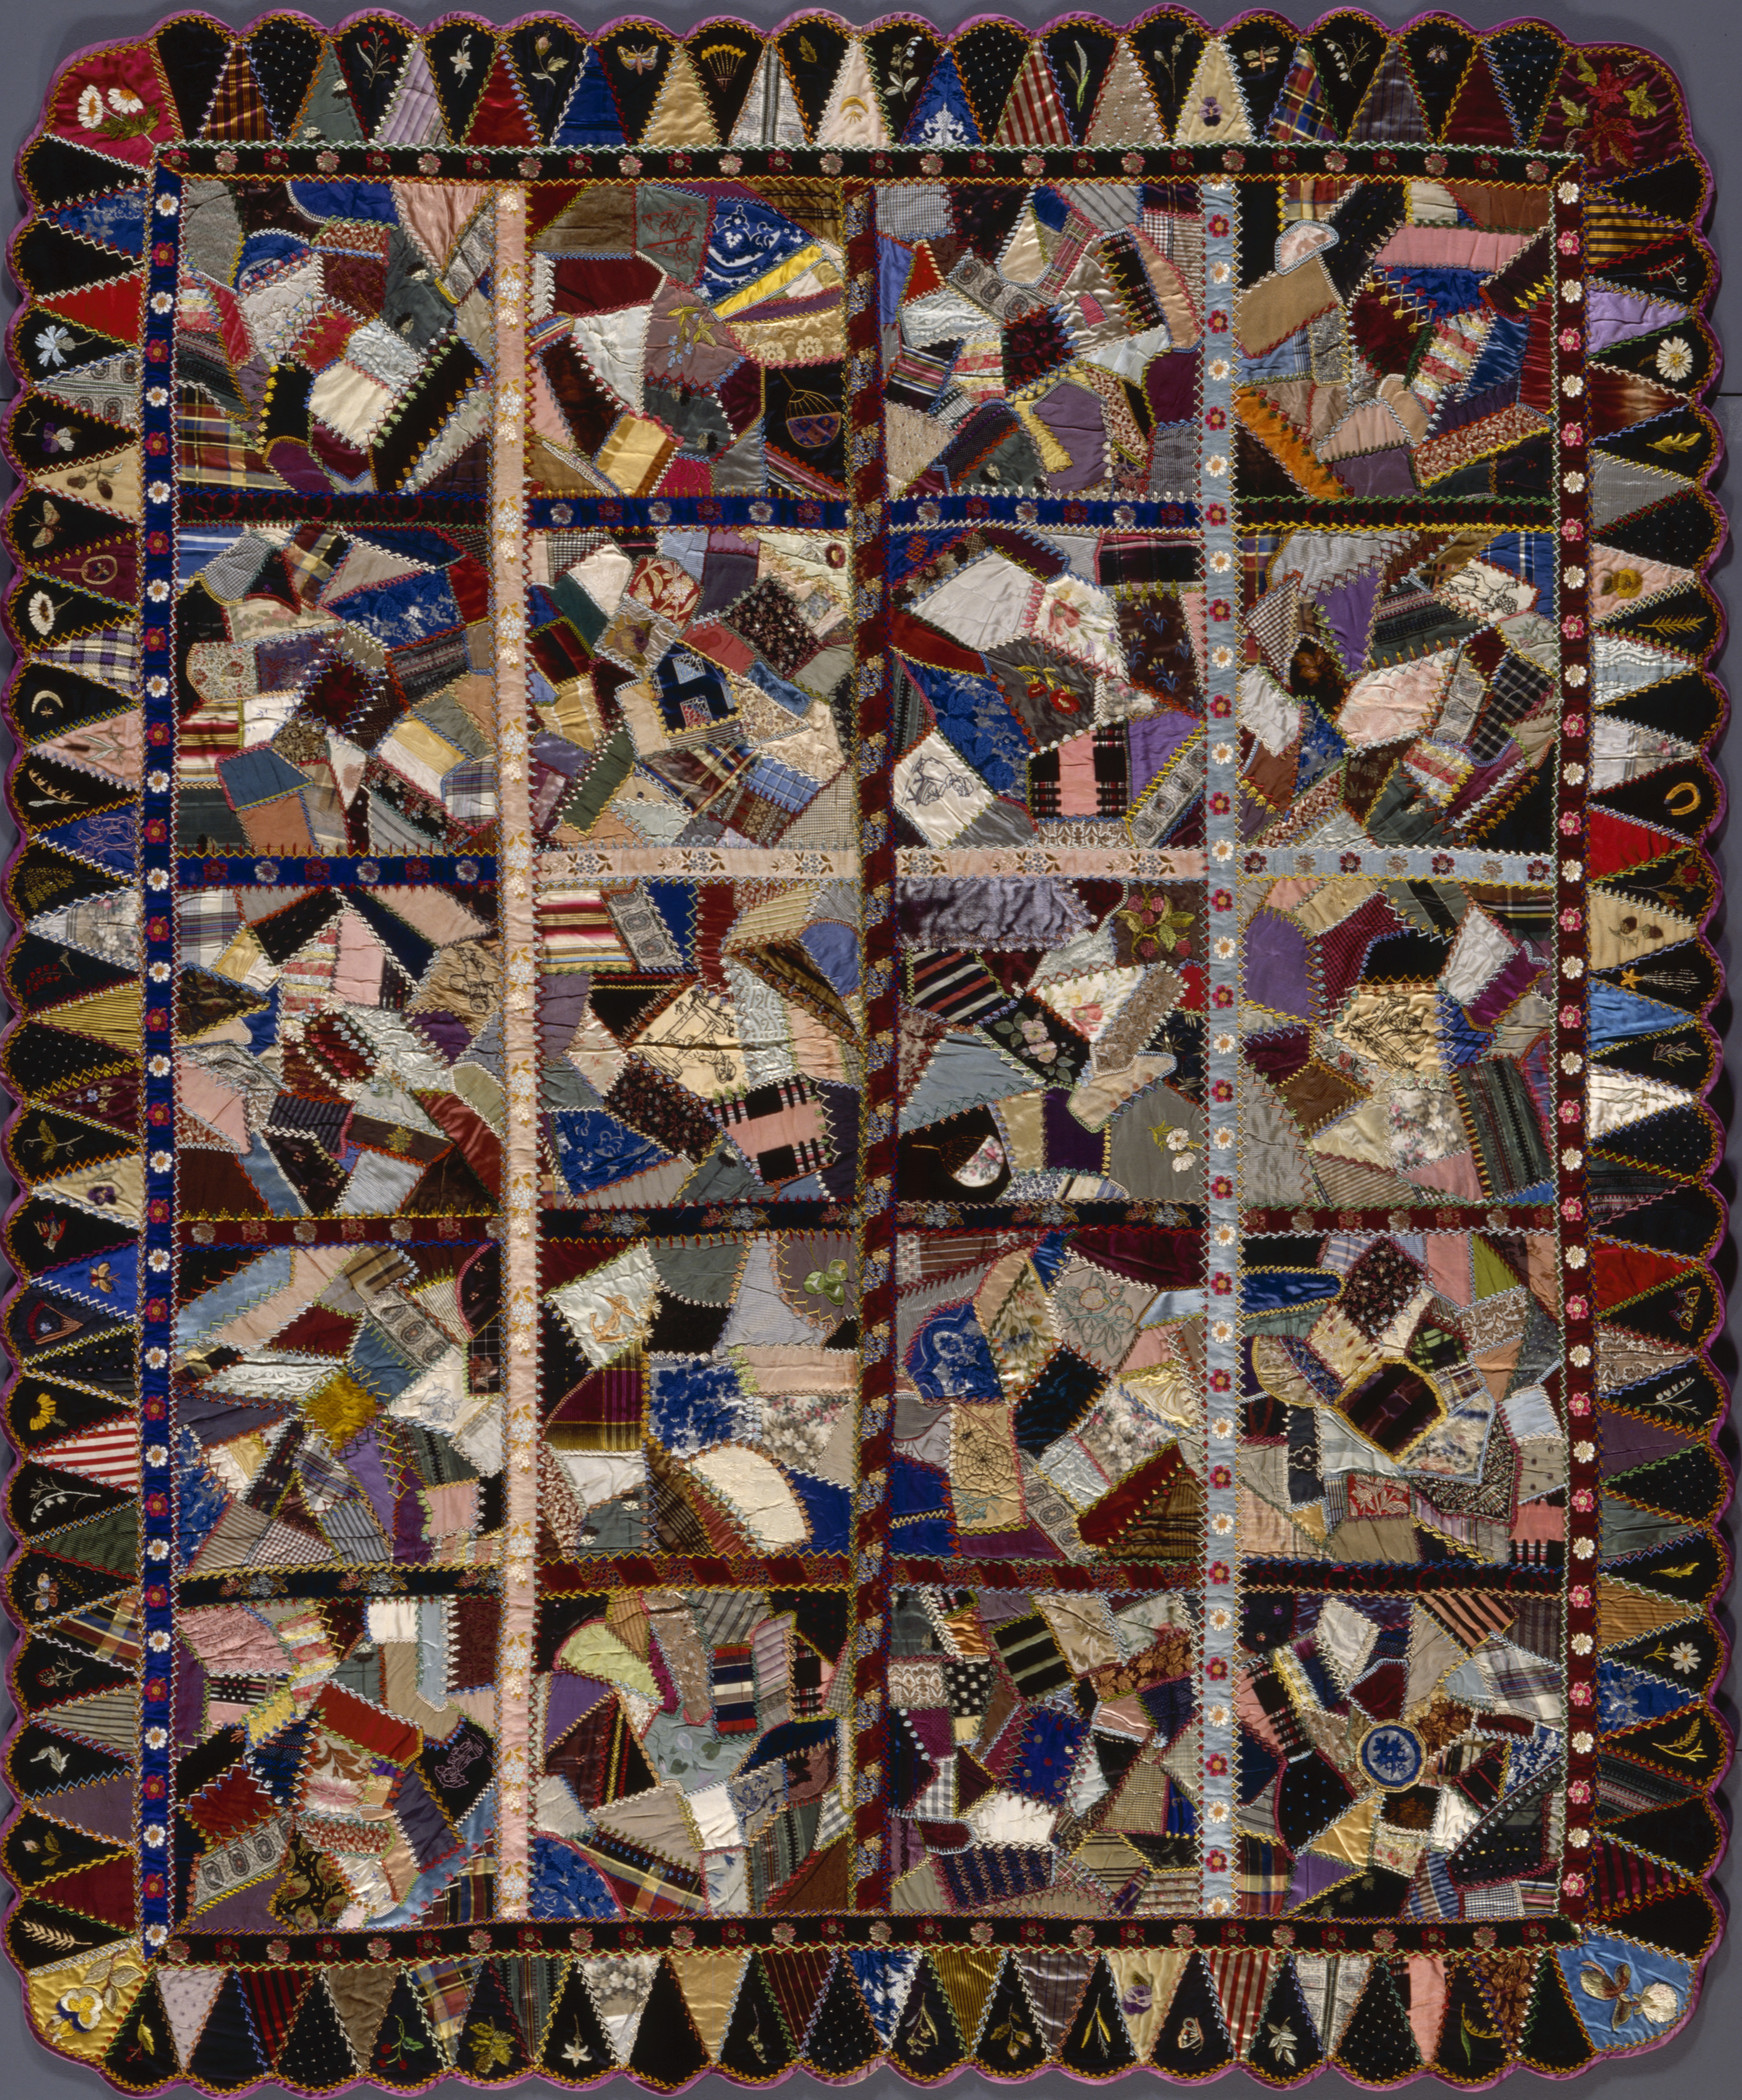 Crazy Quilt, United States, c. 1890, Los Angeles County Museum of Art, gift of Sally Ellis Vogel, photo © Museum Associates/LACMA